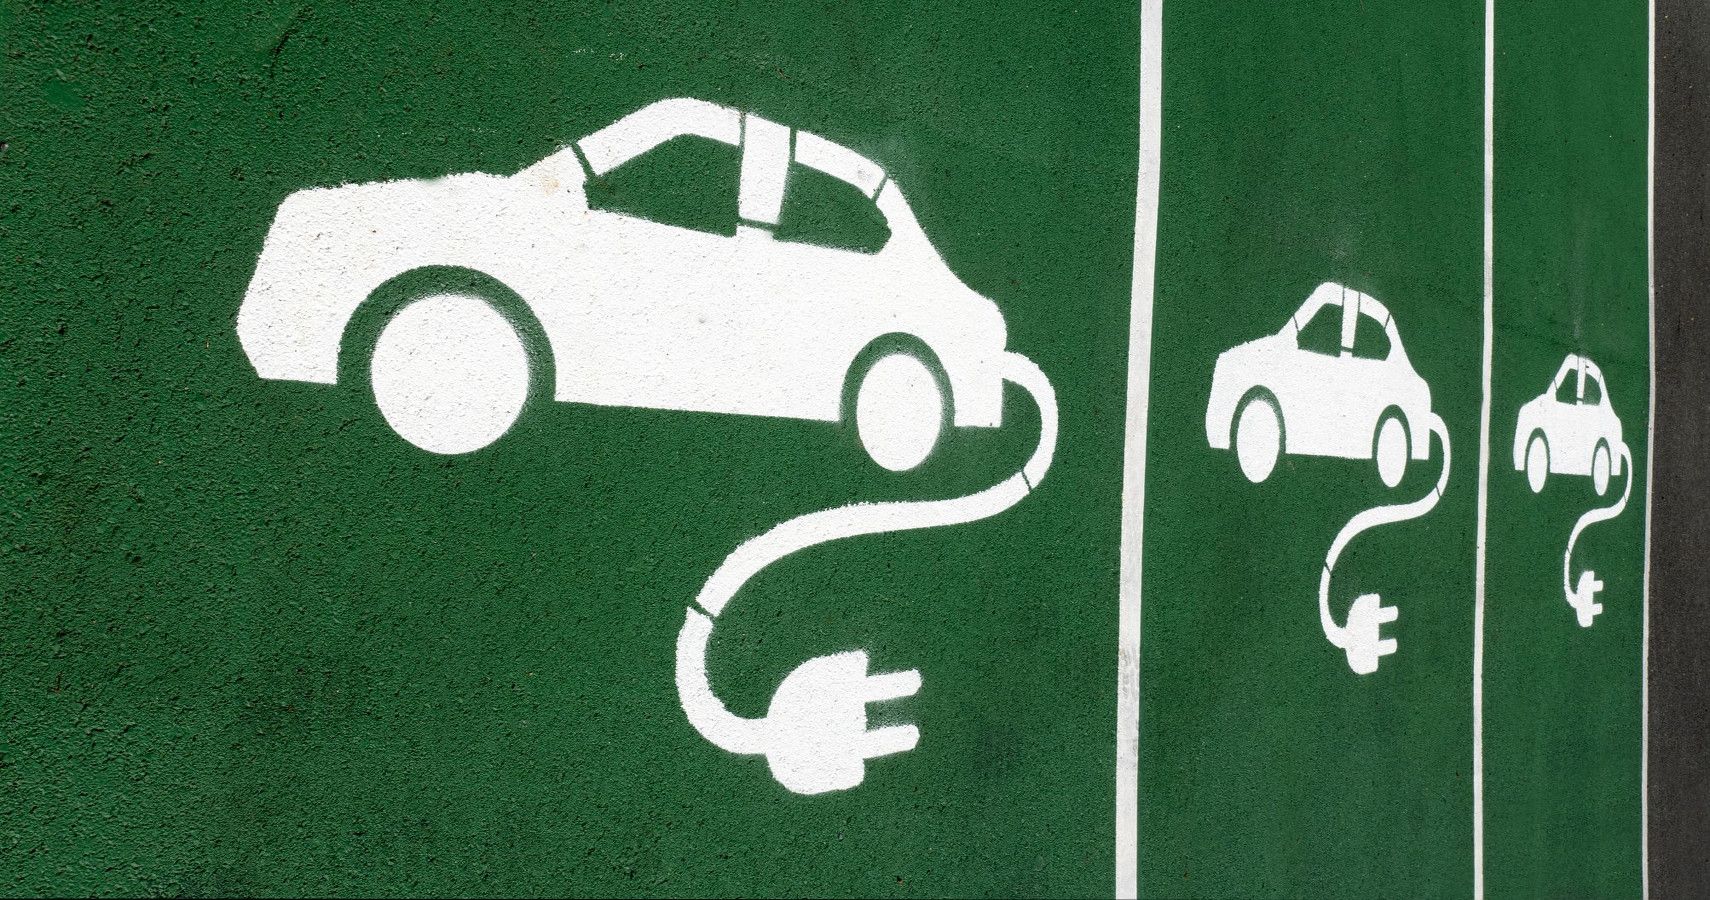 Peer-to-peer charging seems to end range anxiety and shorten charging times